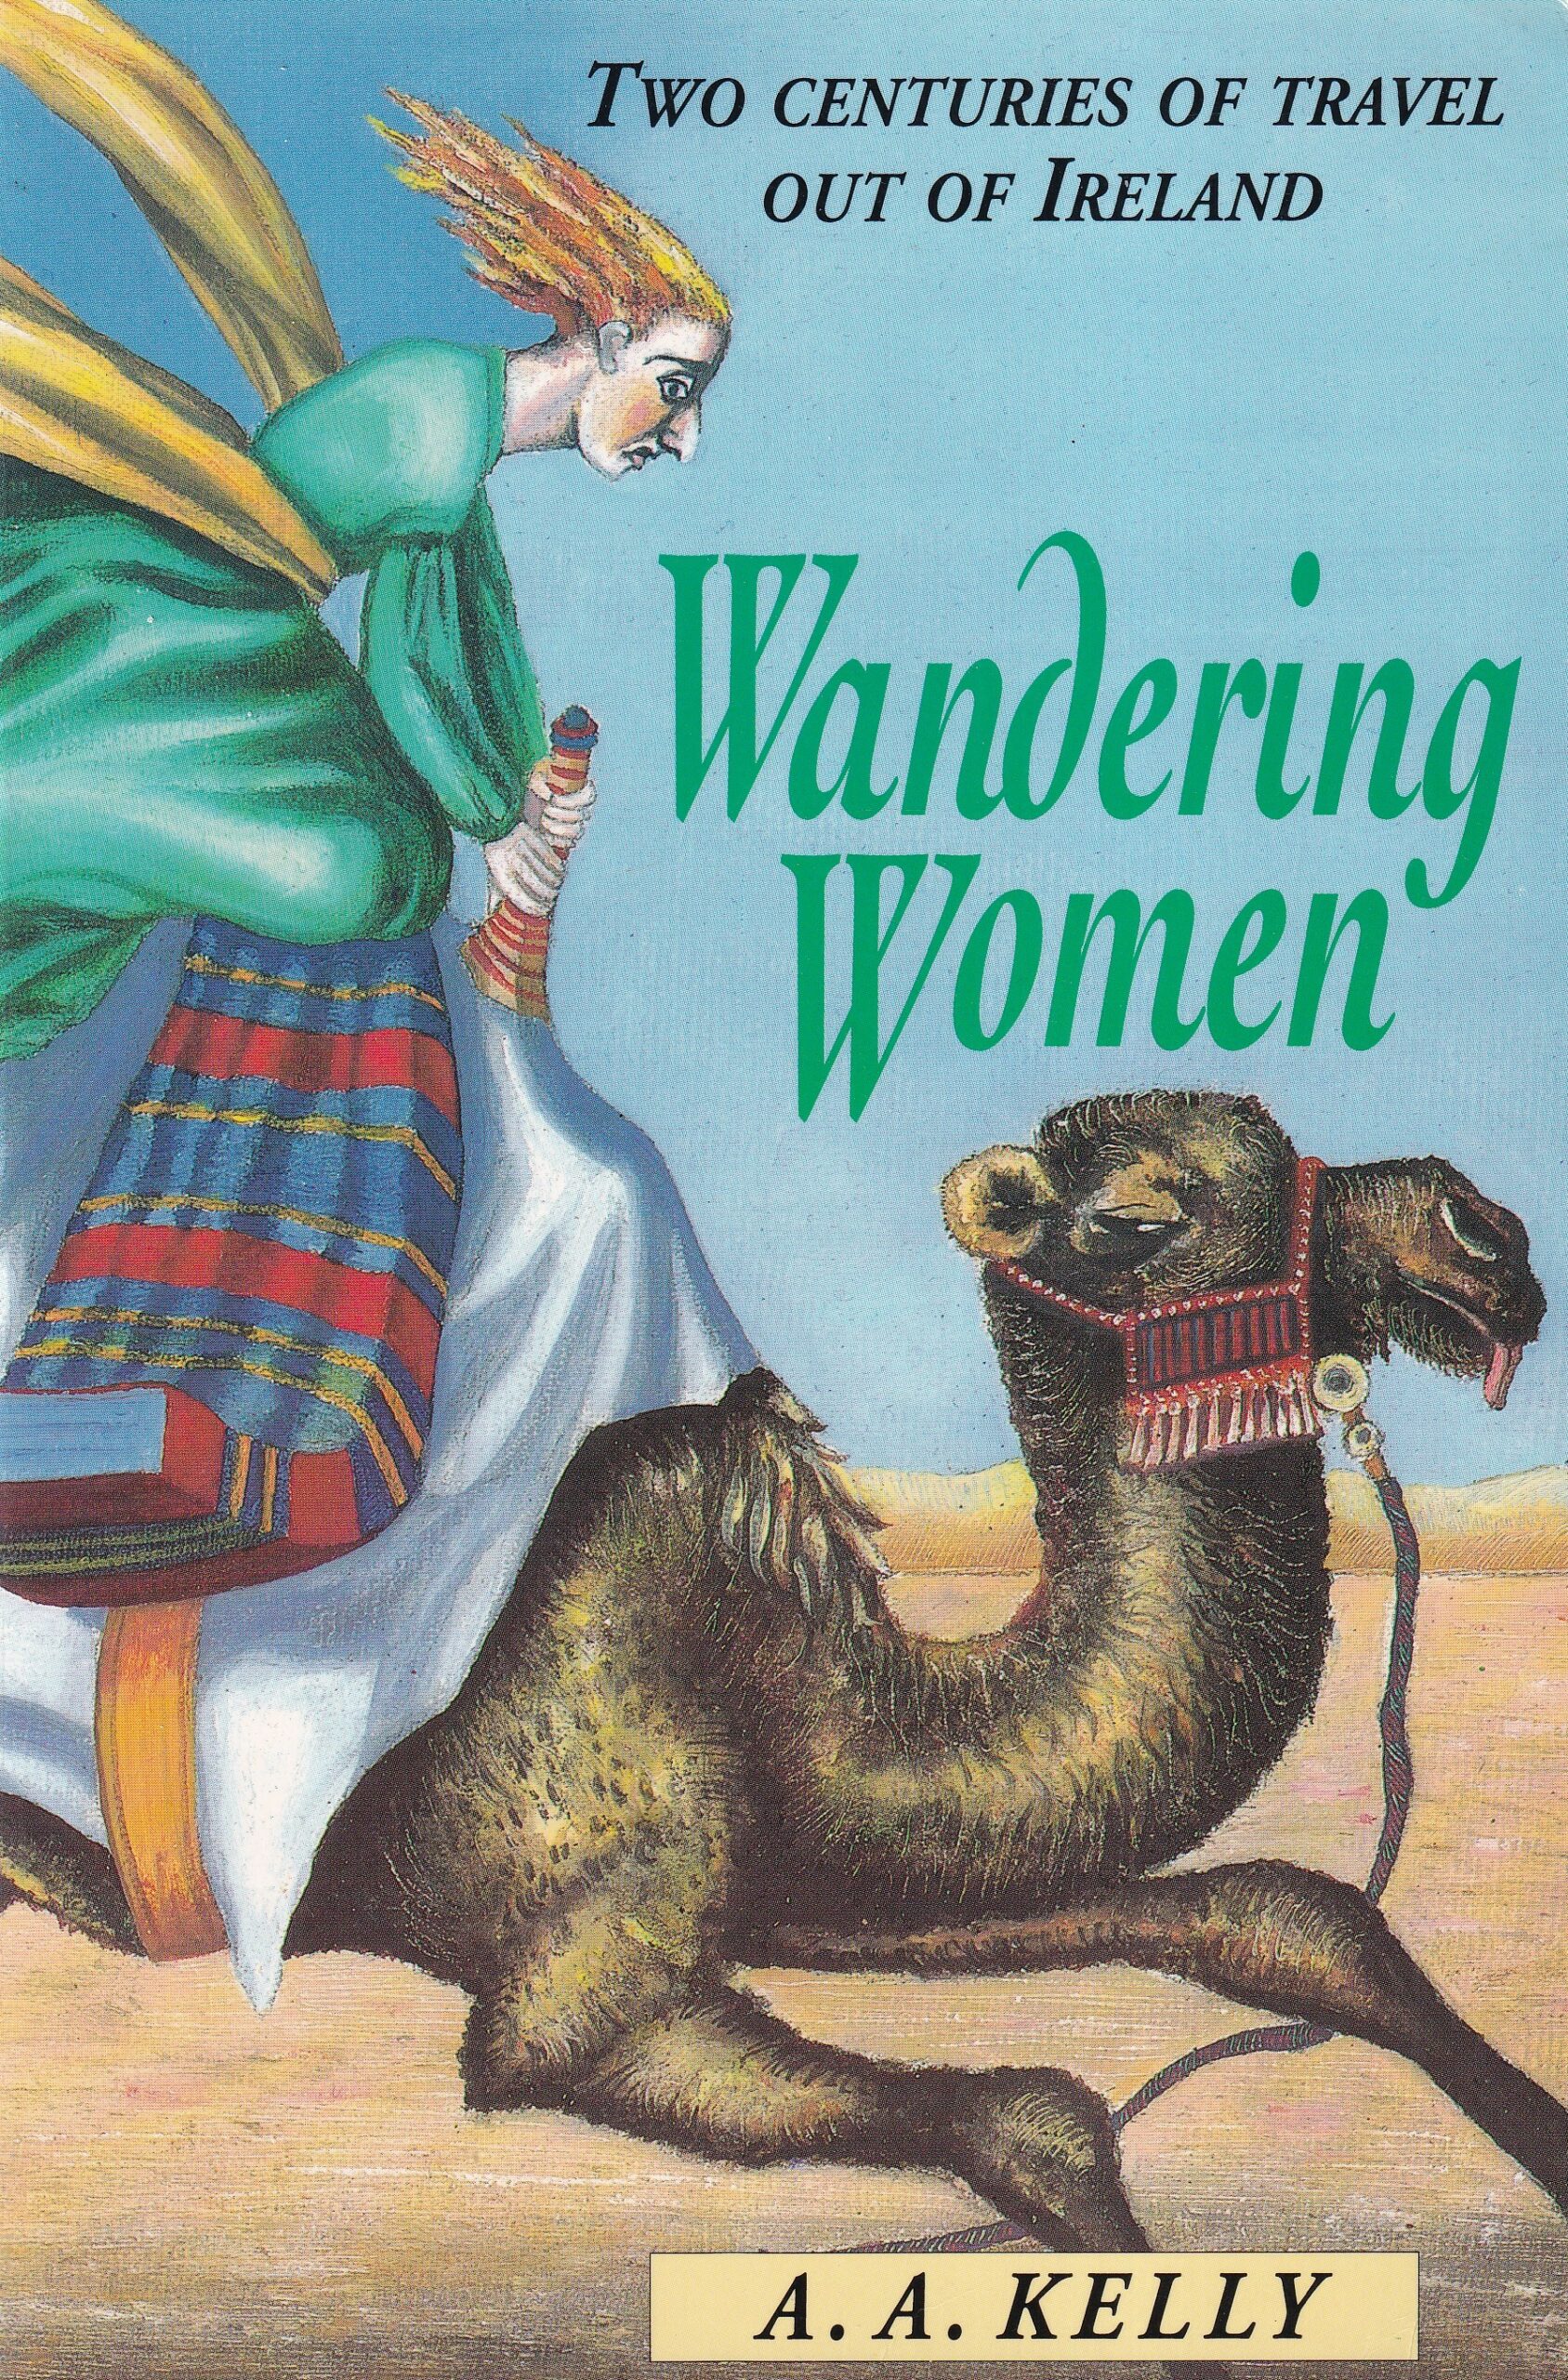 Wandering Women: Two Centuries of Travel Out of Ireland | A.A. Kelly | Charlie Byrne's